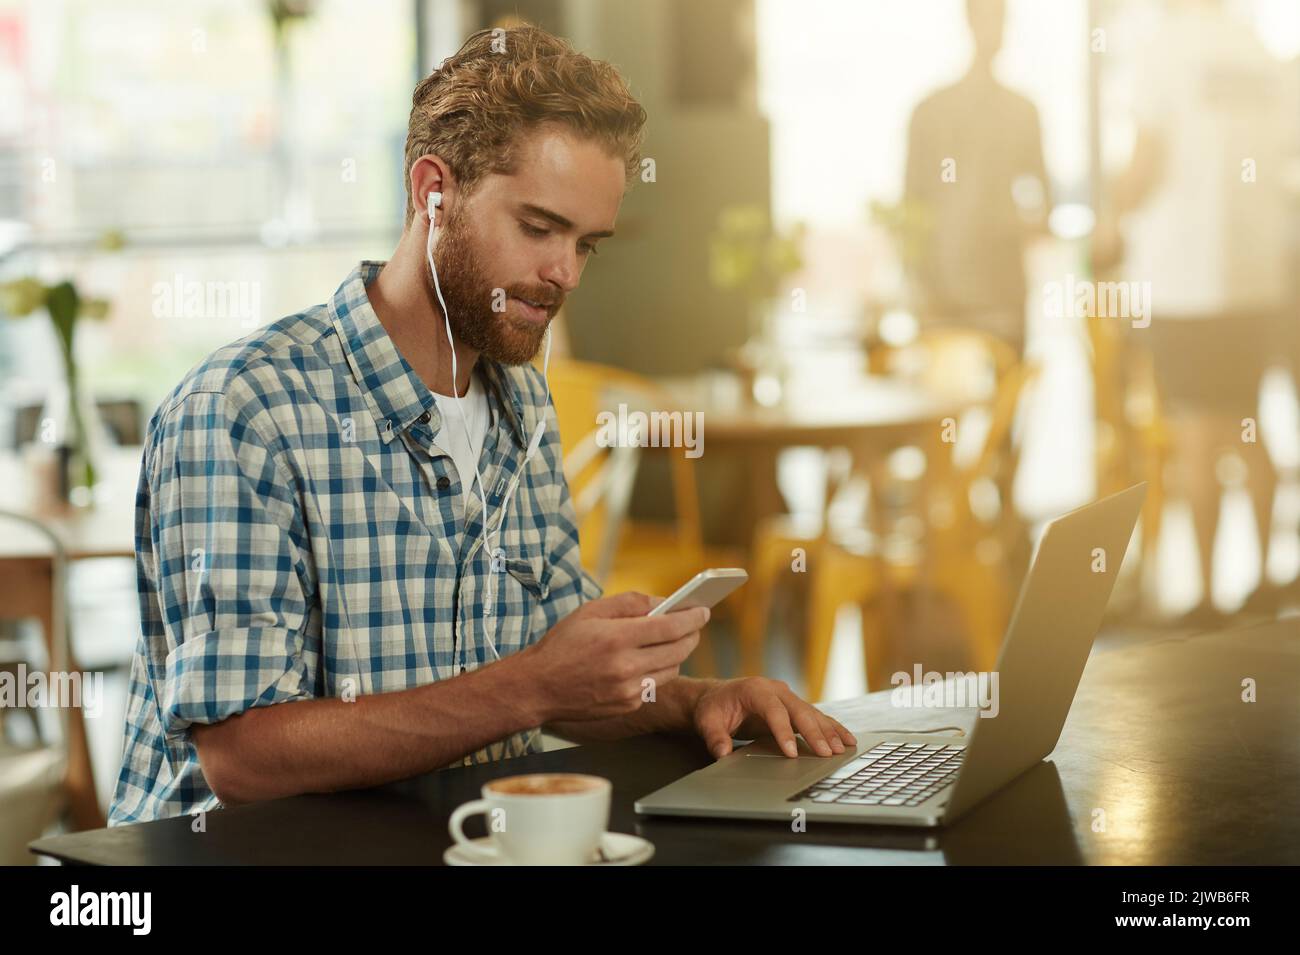 Relaxed and productive. a young man with earphones using a cellphone and laptop in a cafe. Stock Photo